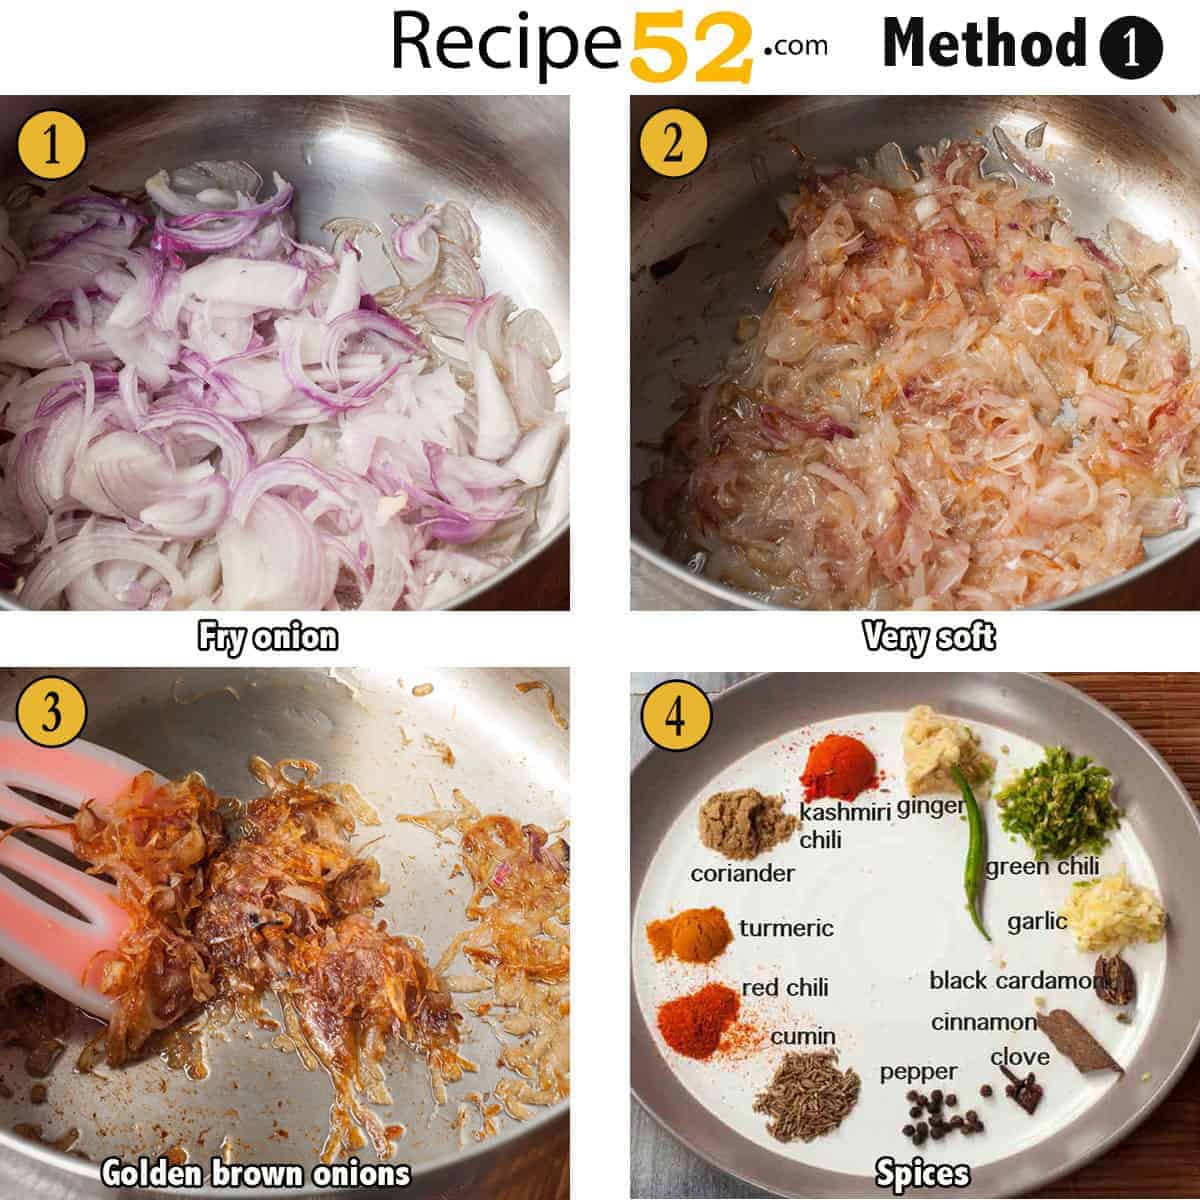 Steps to show frying of onions and adding spices.